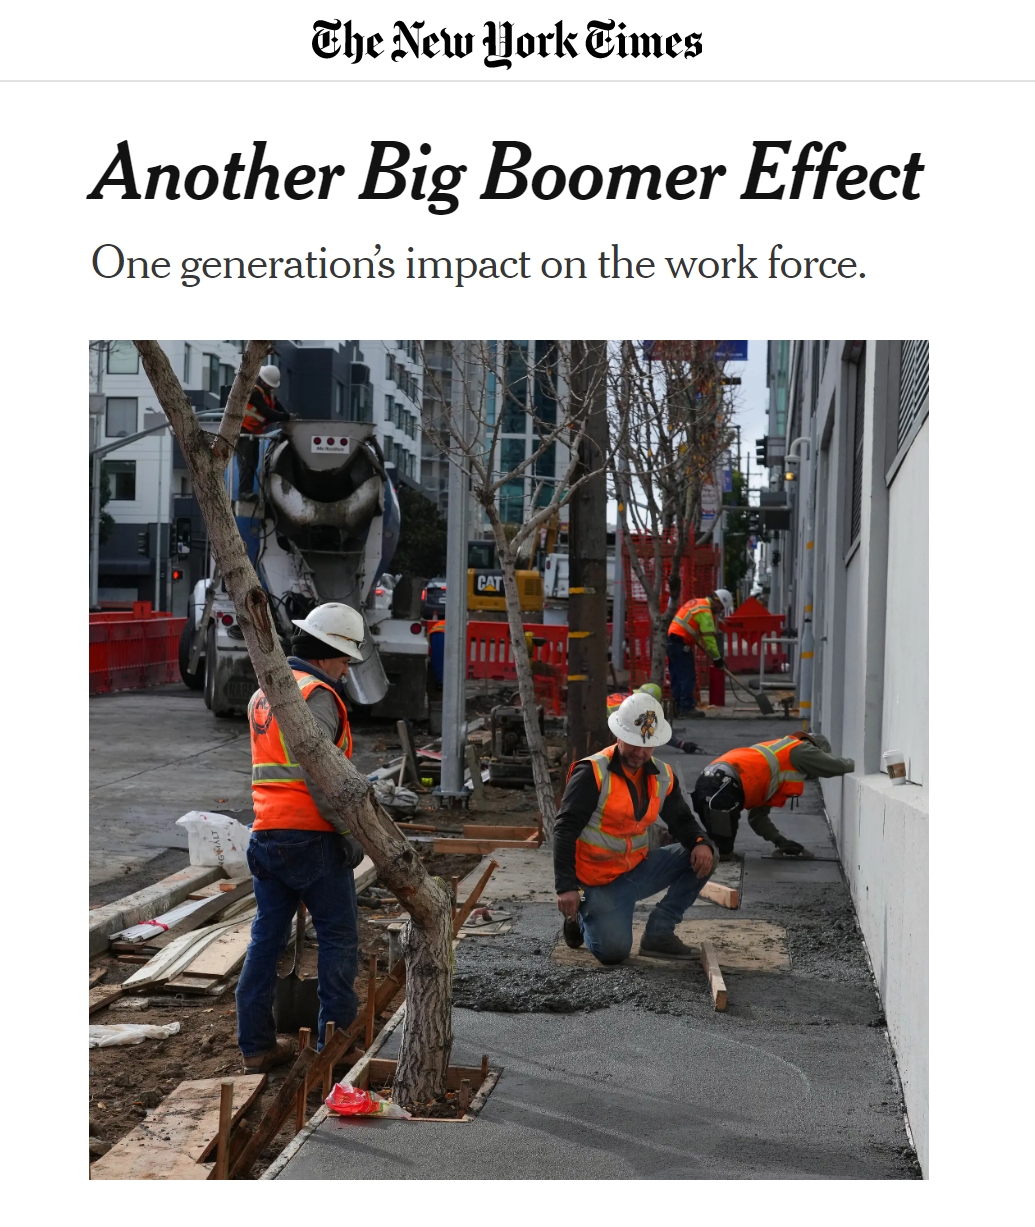 The New York Times Another Big Boomer Effect One generation's impact on the work force